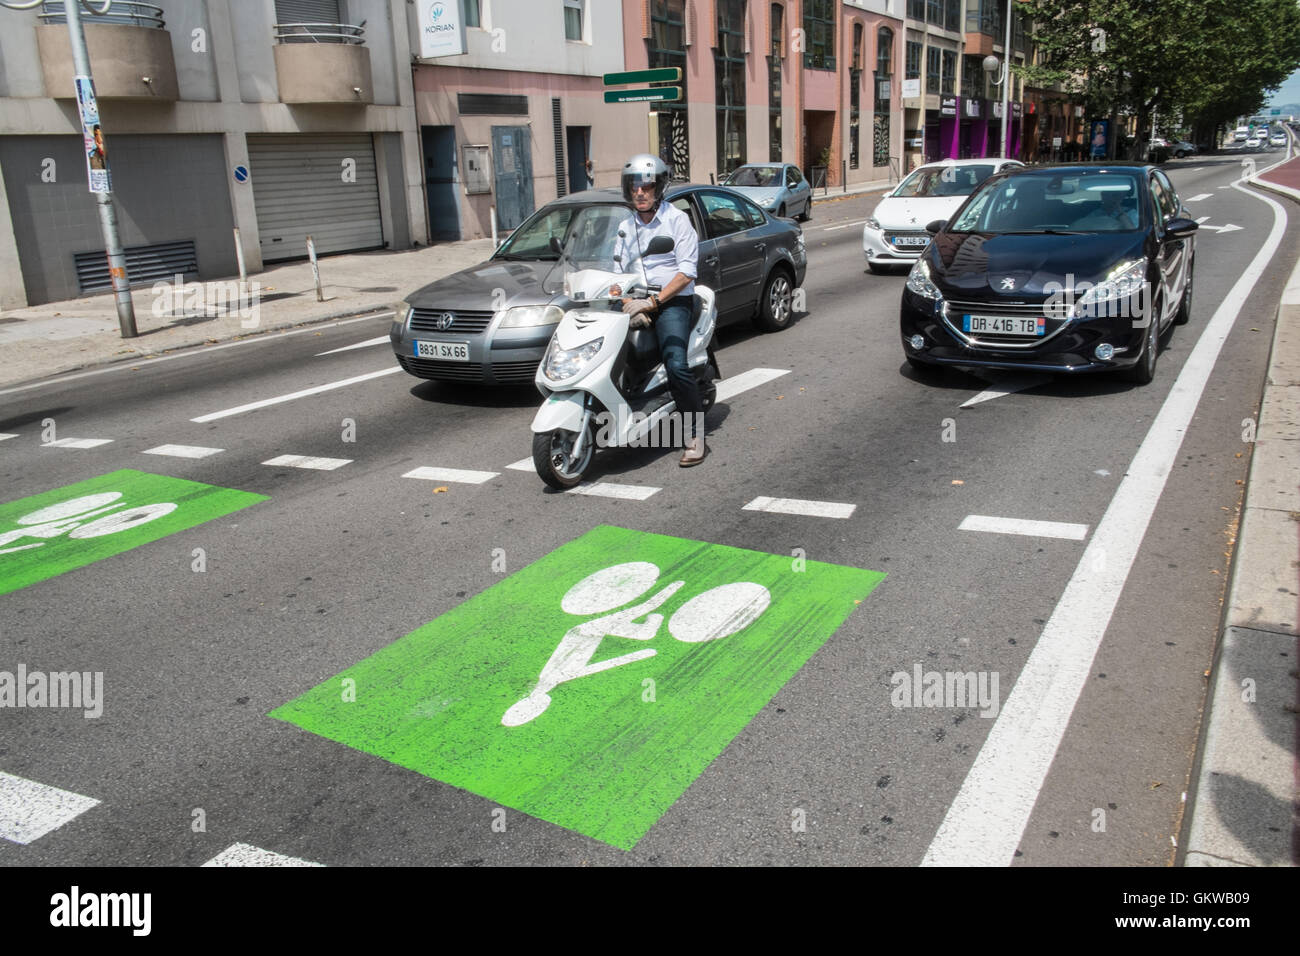 Space,priority box area,front of traffic for bicycles at zebra crossing in urban city centre of Perpignan,South of France. Stock Photo